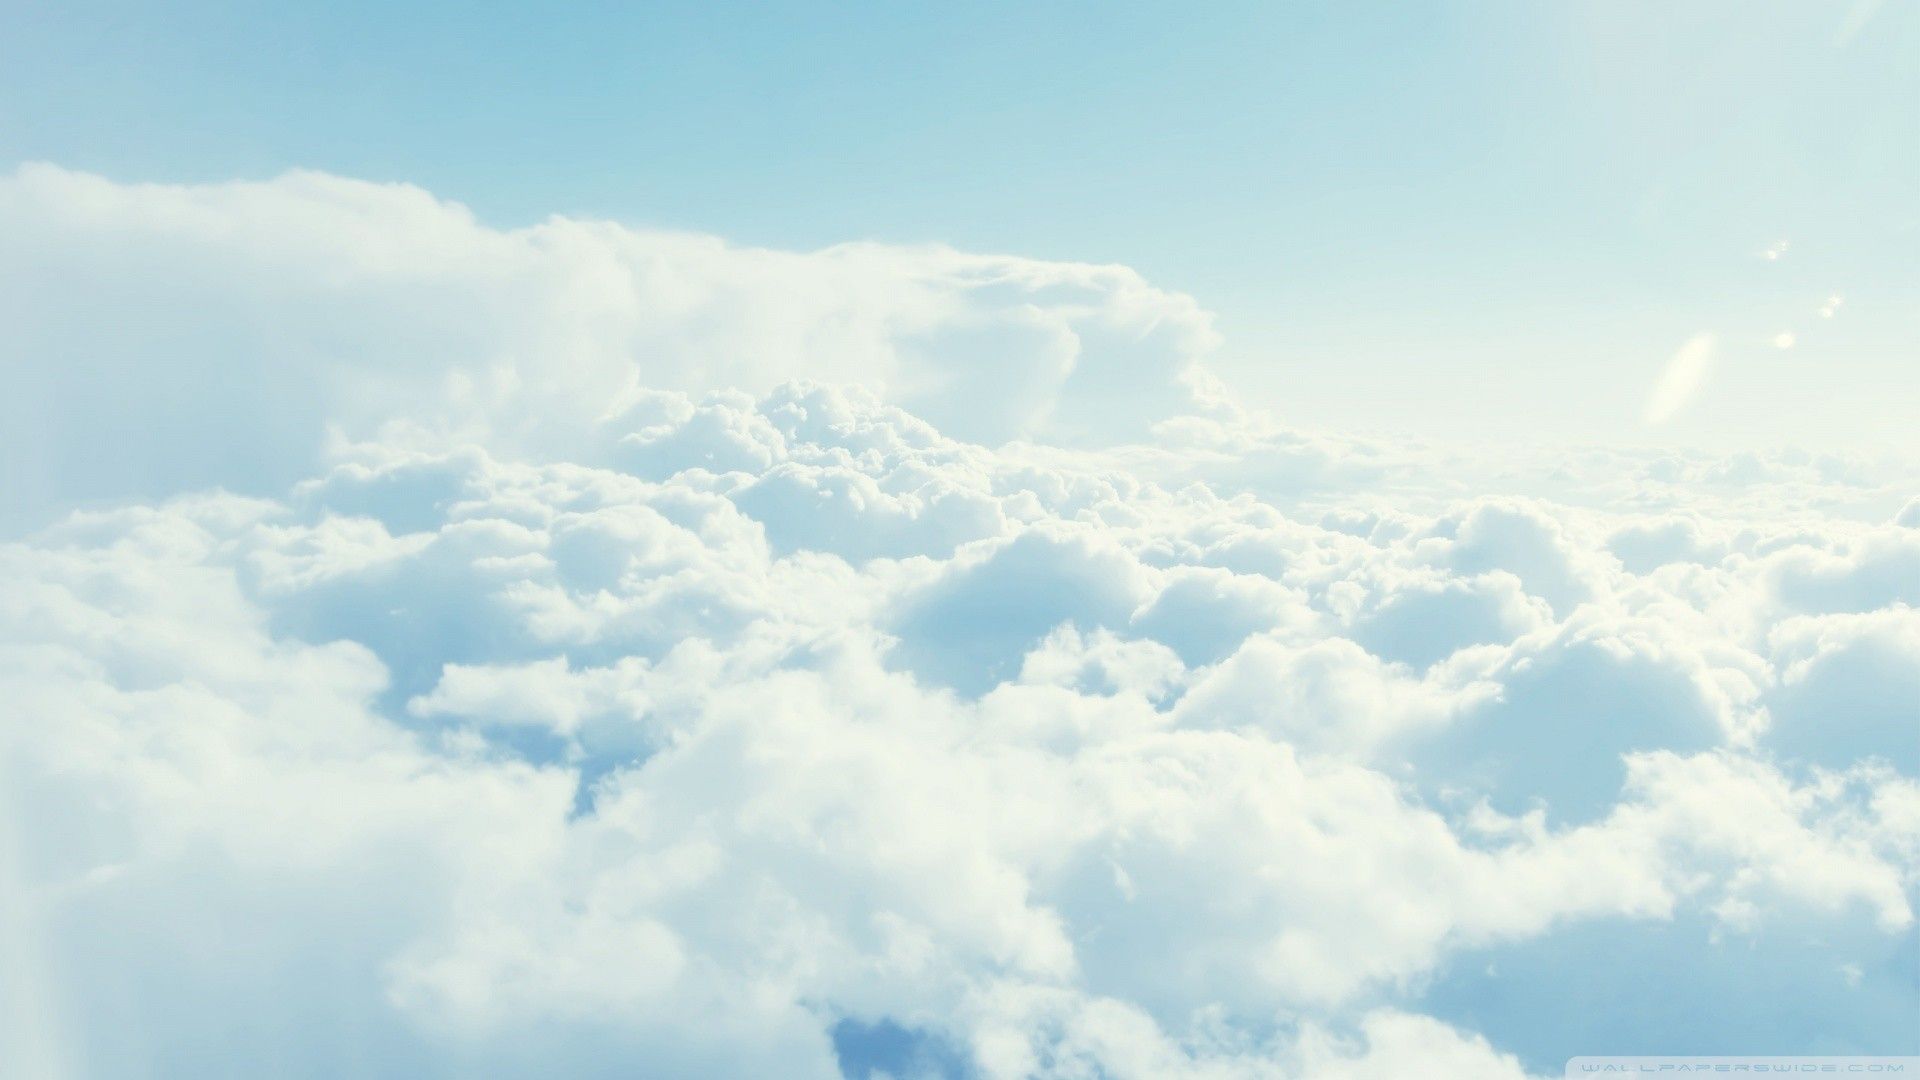 Aesthetic Clouds Wallpaper 1920x1080 56427